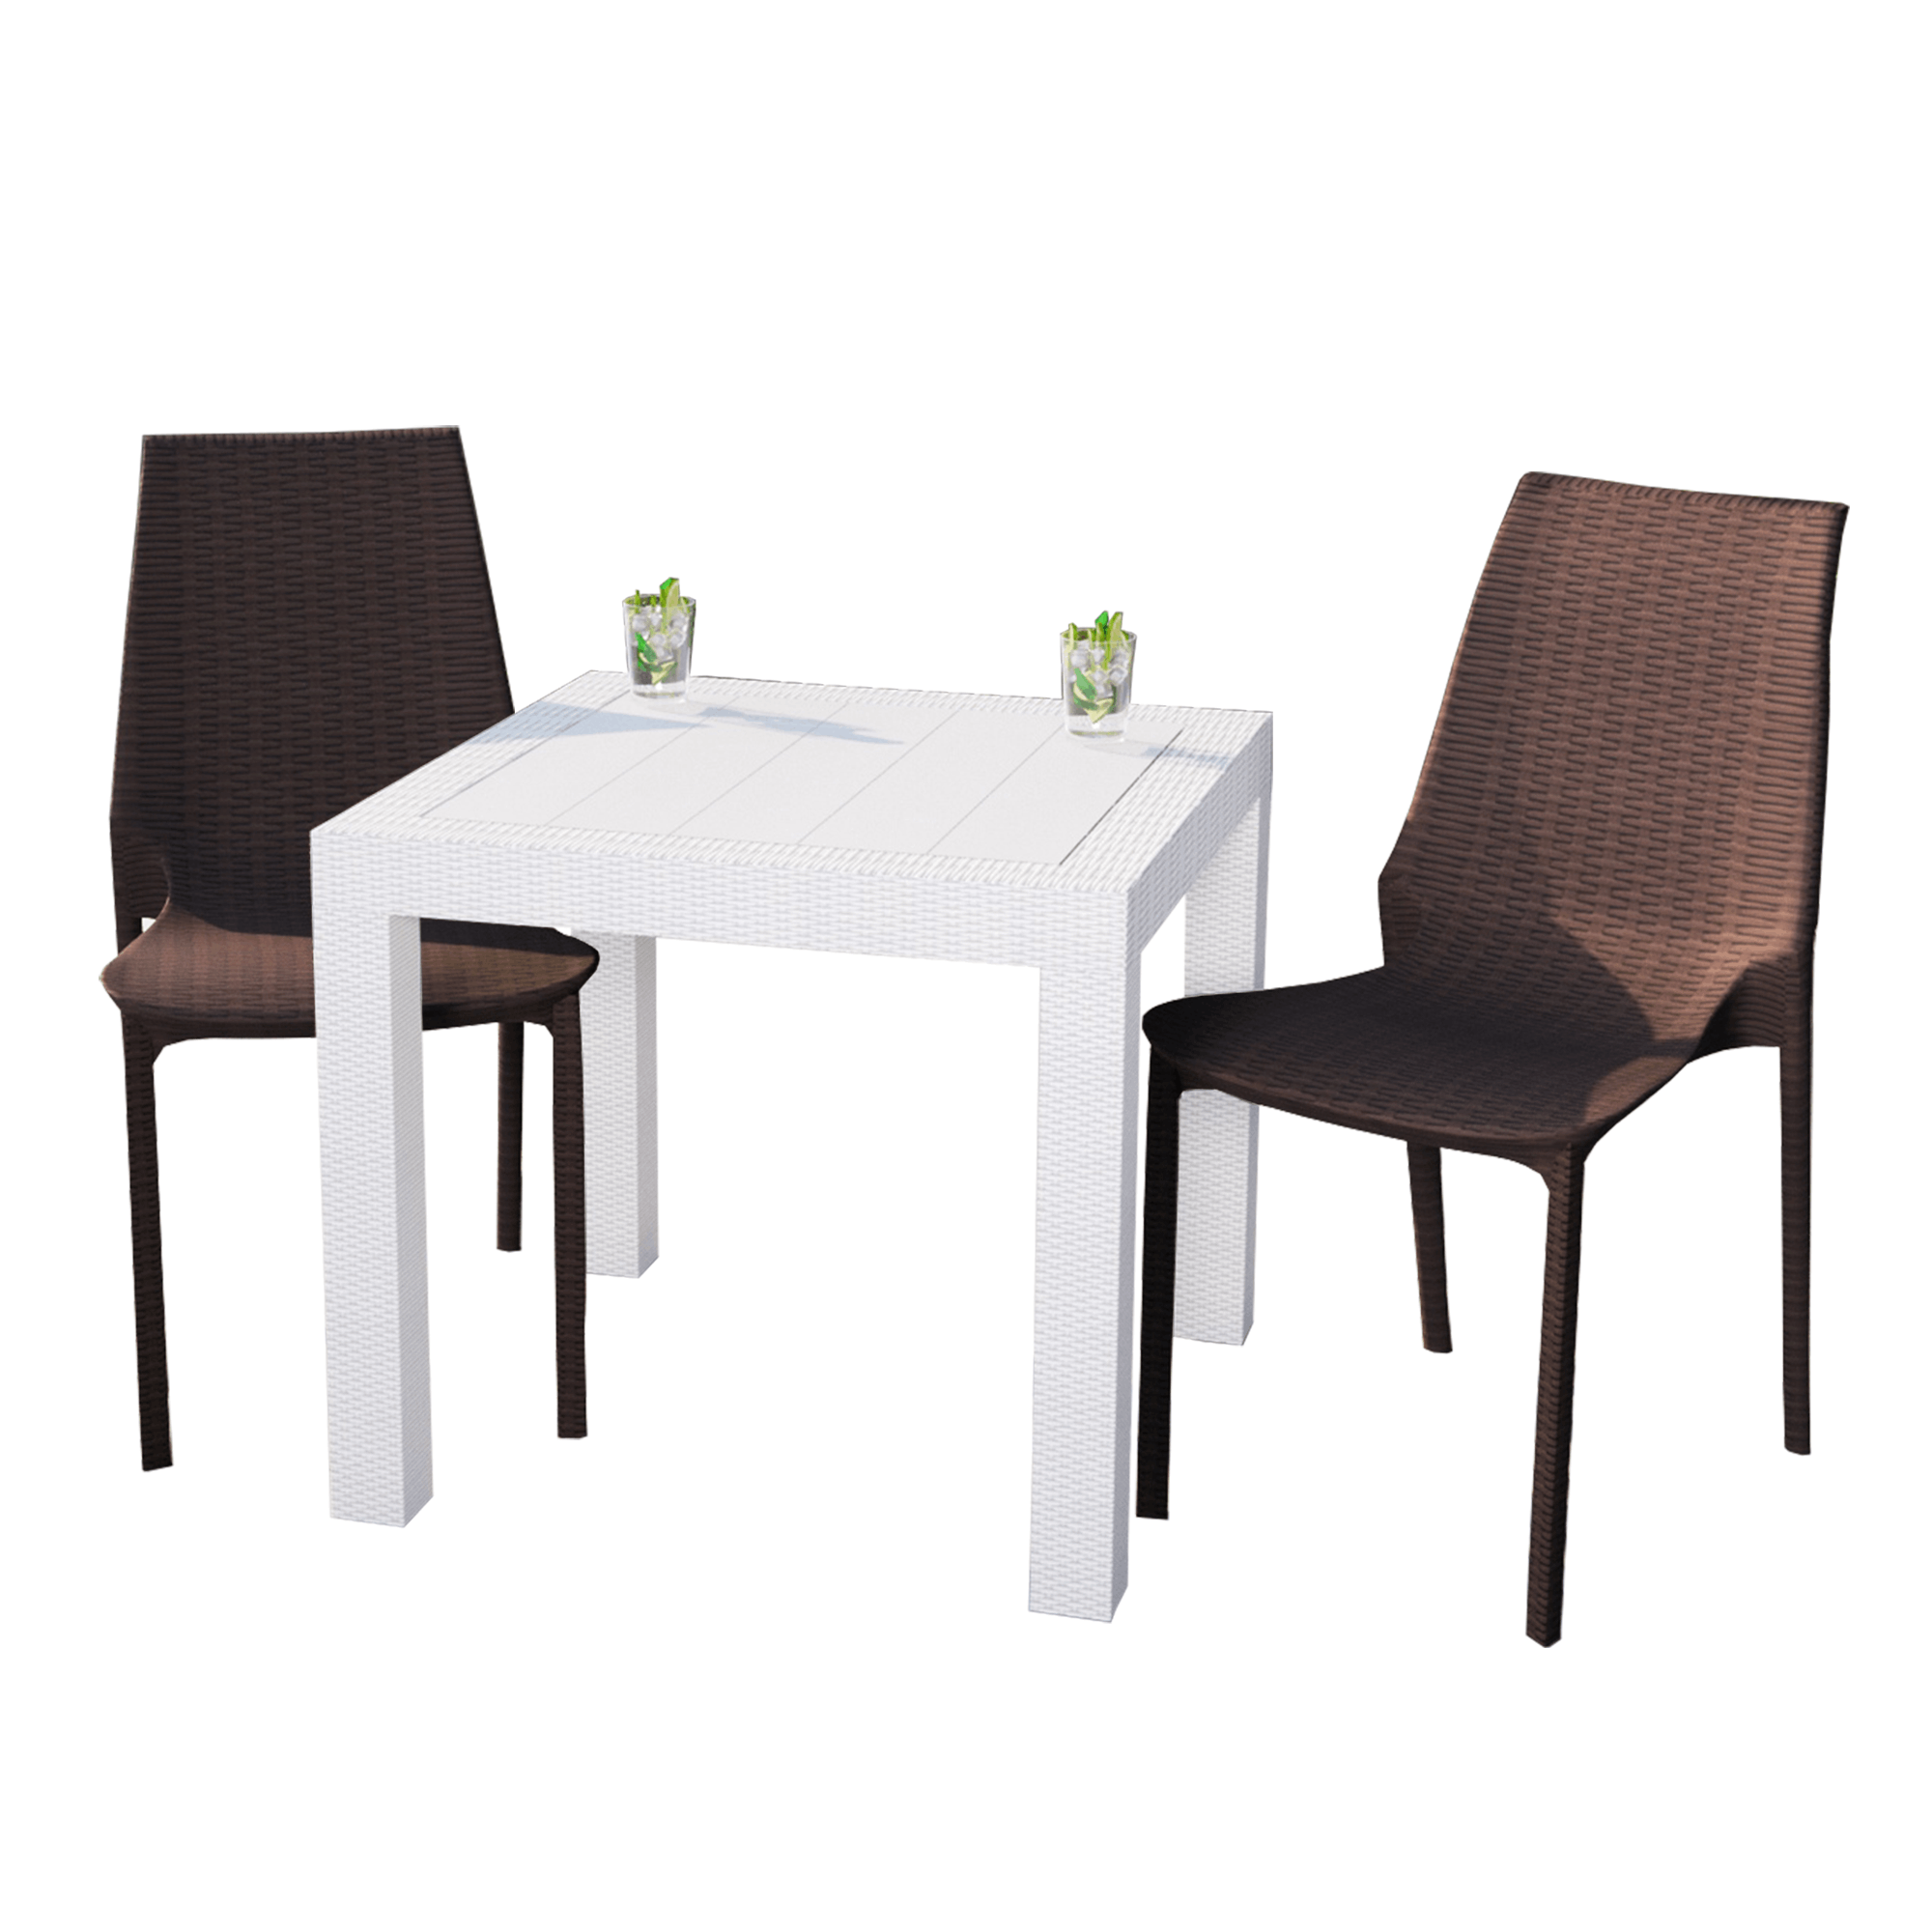 LeisureMod Kent Mid-Century Modern Weave Design 2-Piece Outdoor Patio Dining Set with Plastic Square Table and 2 Stackable Chairs for Patio, Poolside, and Backyard Garden (White/Brown) - image 1 of 18